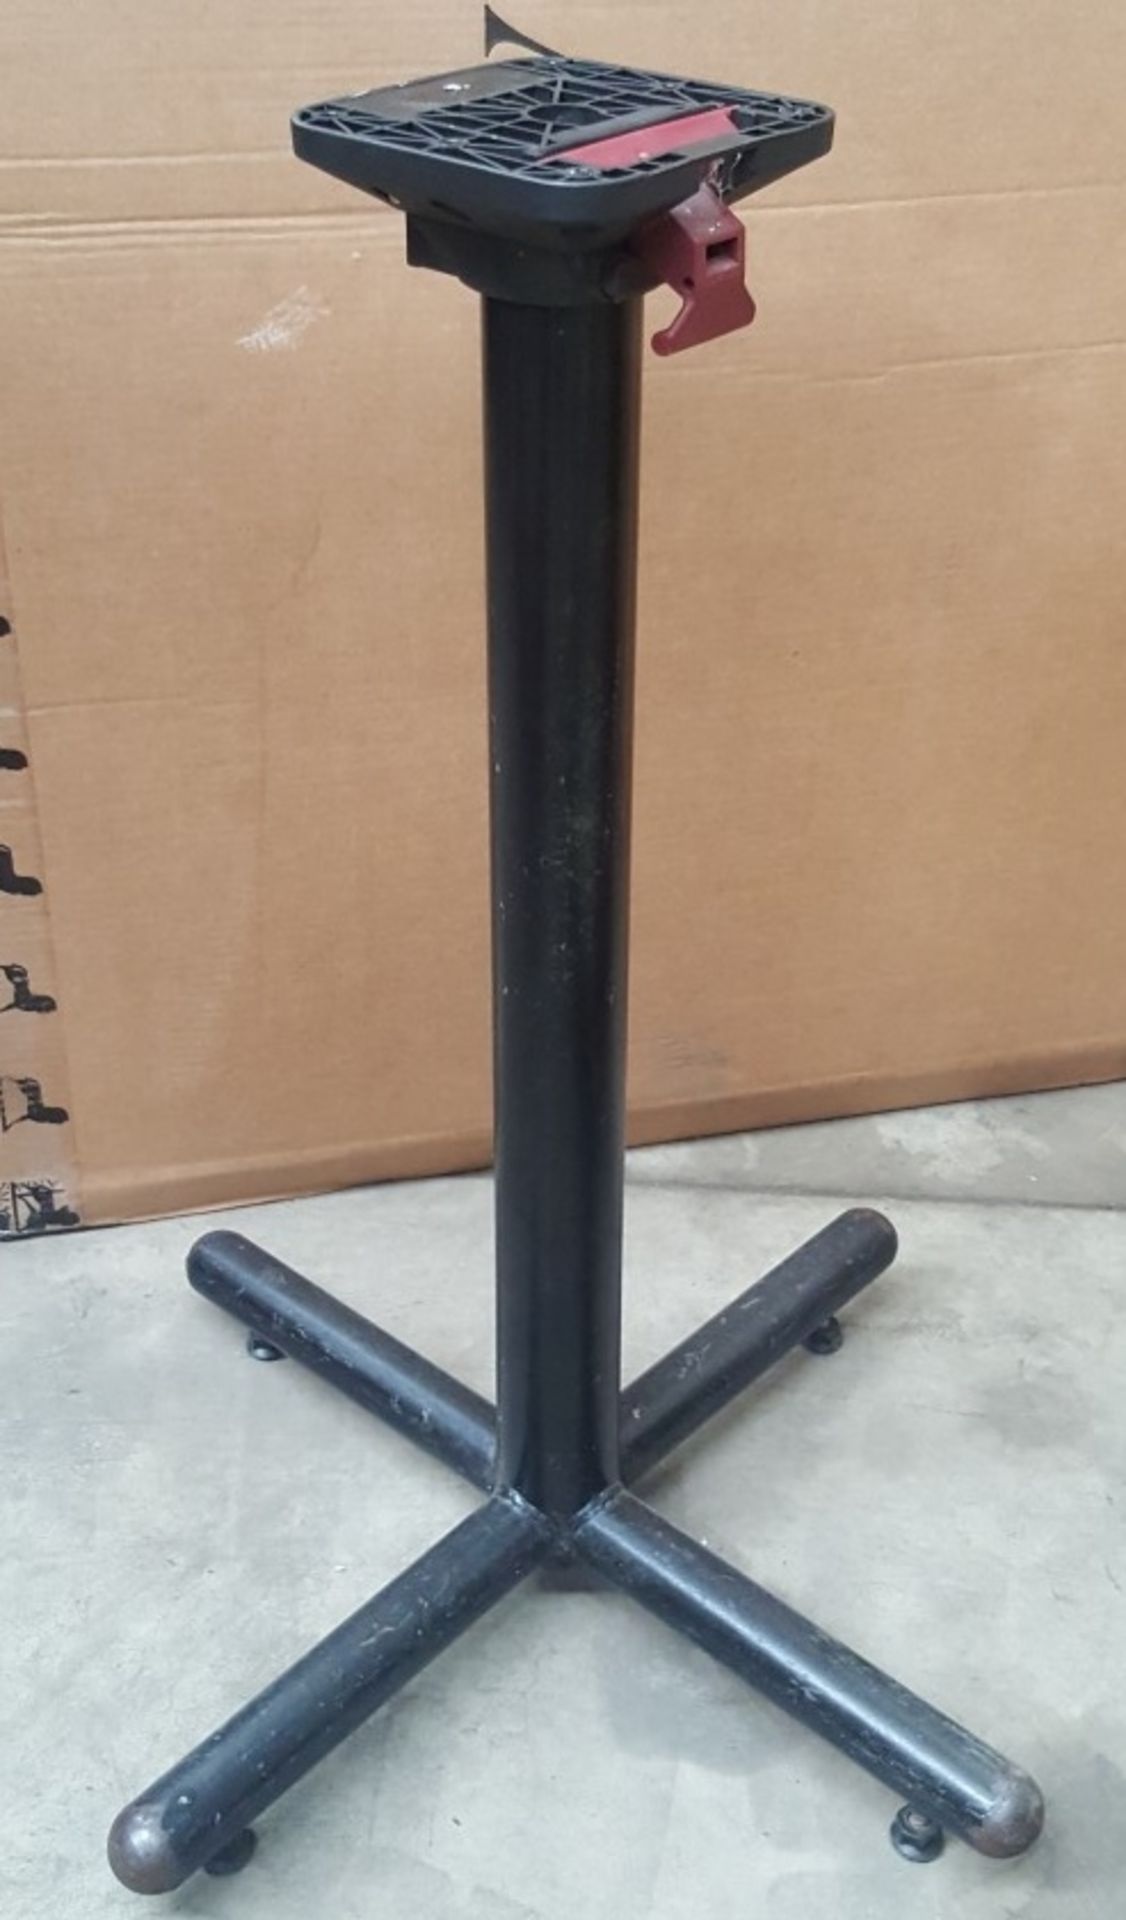 6 x 4 Cross Leg Metal Table Bases For Restaurant Tables - CL350 - Location: Altrincham WA14 - Image 4 of 4